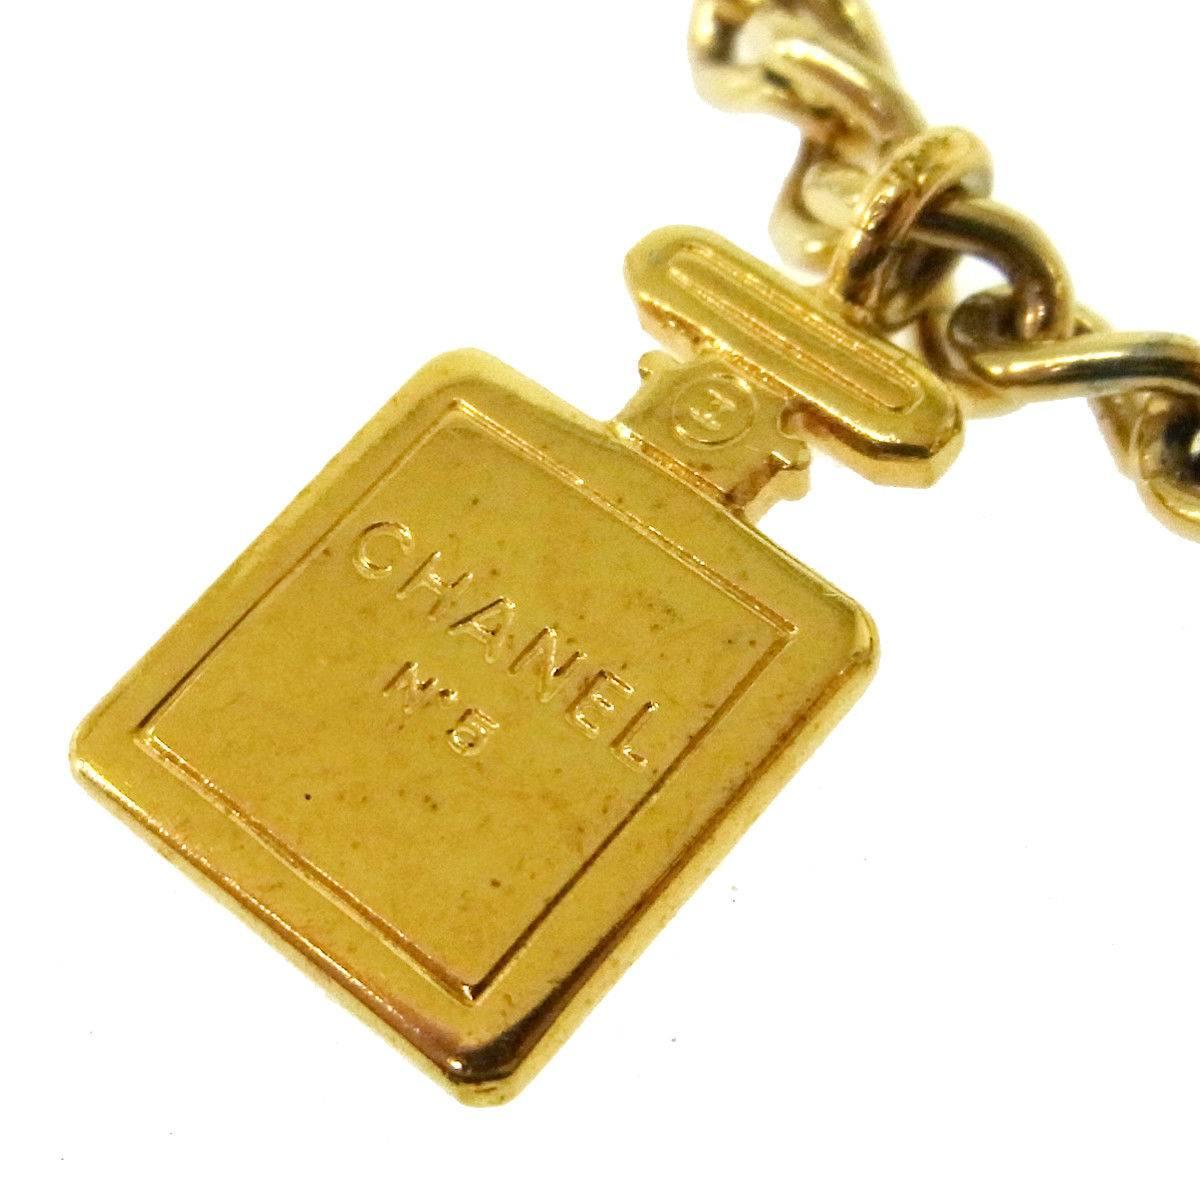 Chanel Vintage No 5 Perfume Bottle Charm Chain Evening Bangle Bracelet 

Metal
Gold tone hardware
Made in Italy 
Lobster claw closure
Charms measure 0.5" W x 0.75" H
Total length 6.75"
